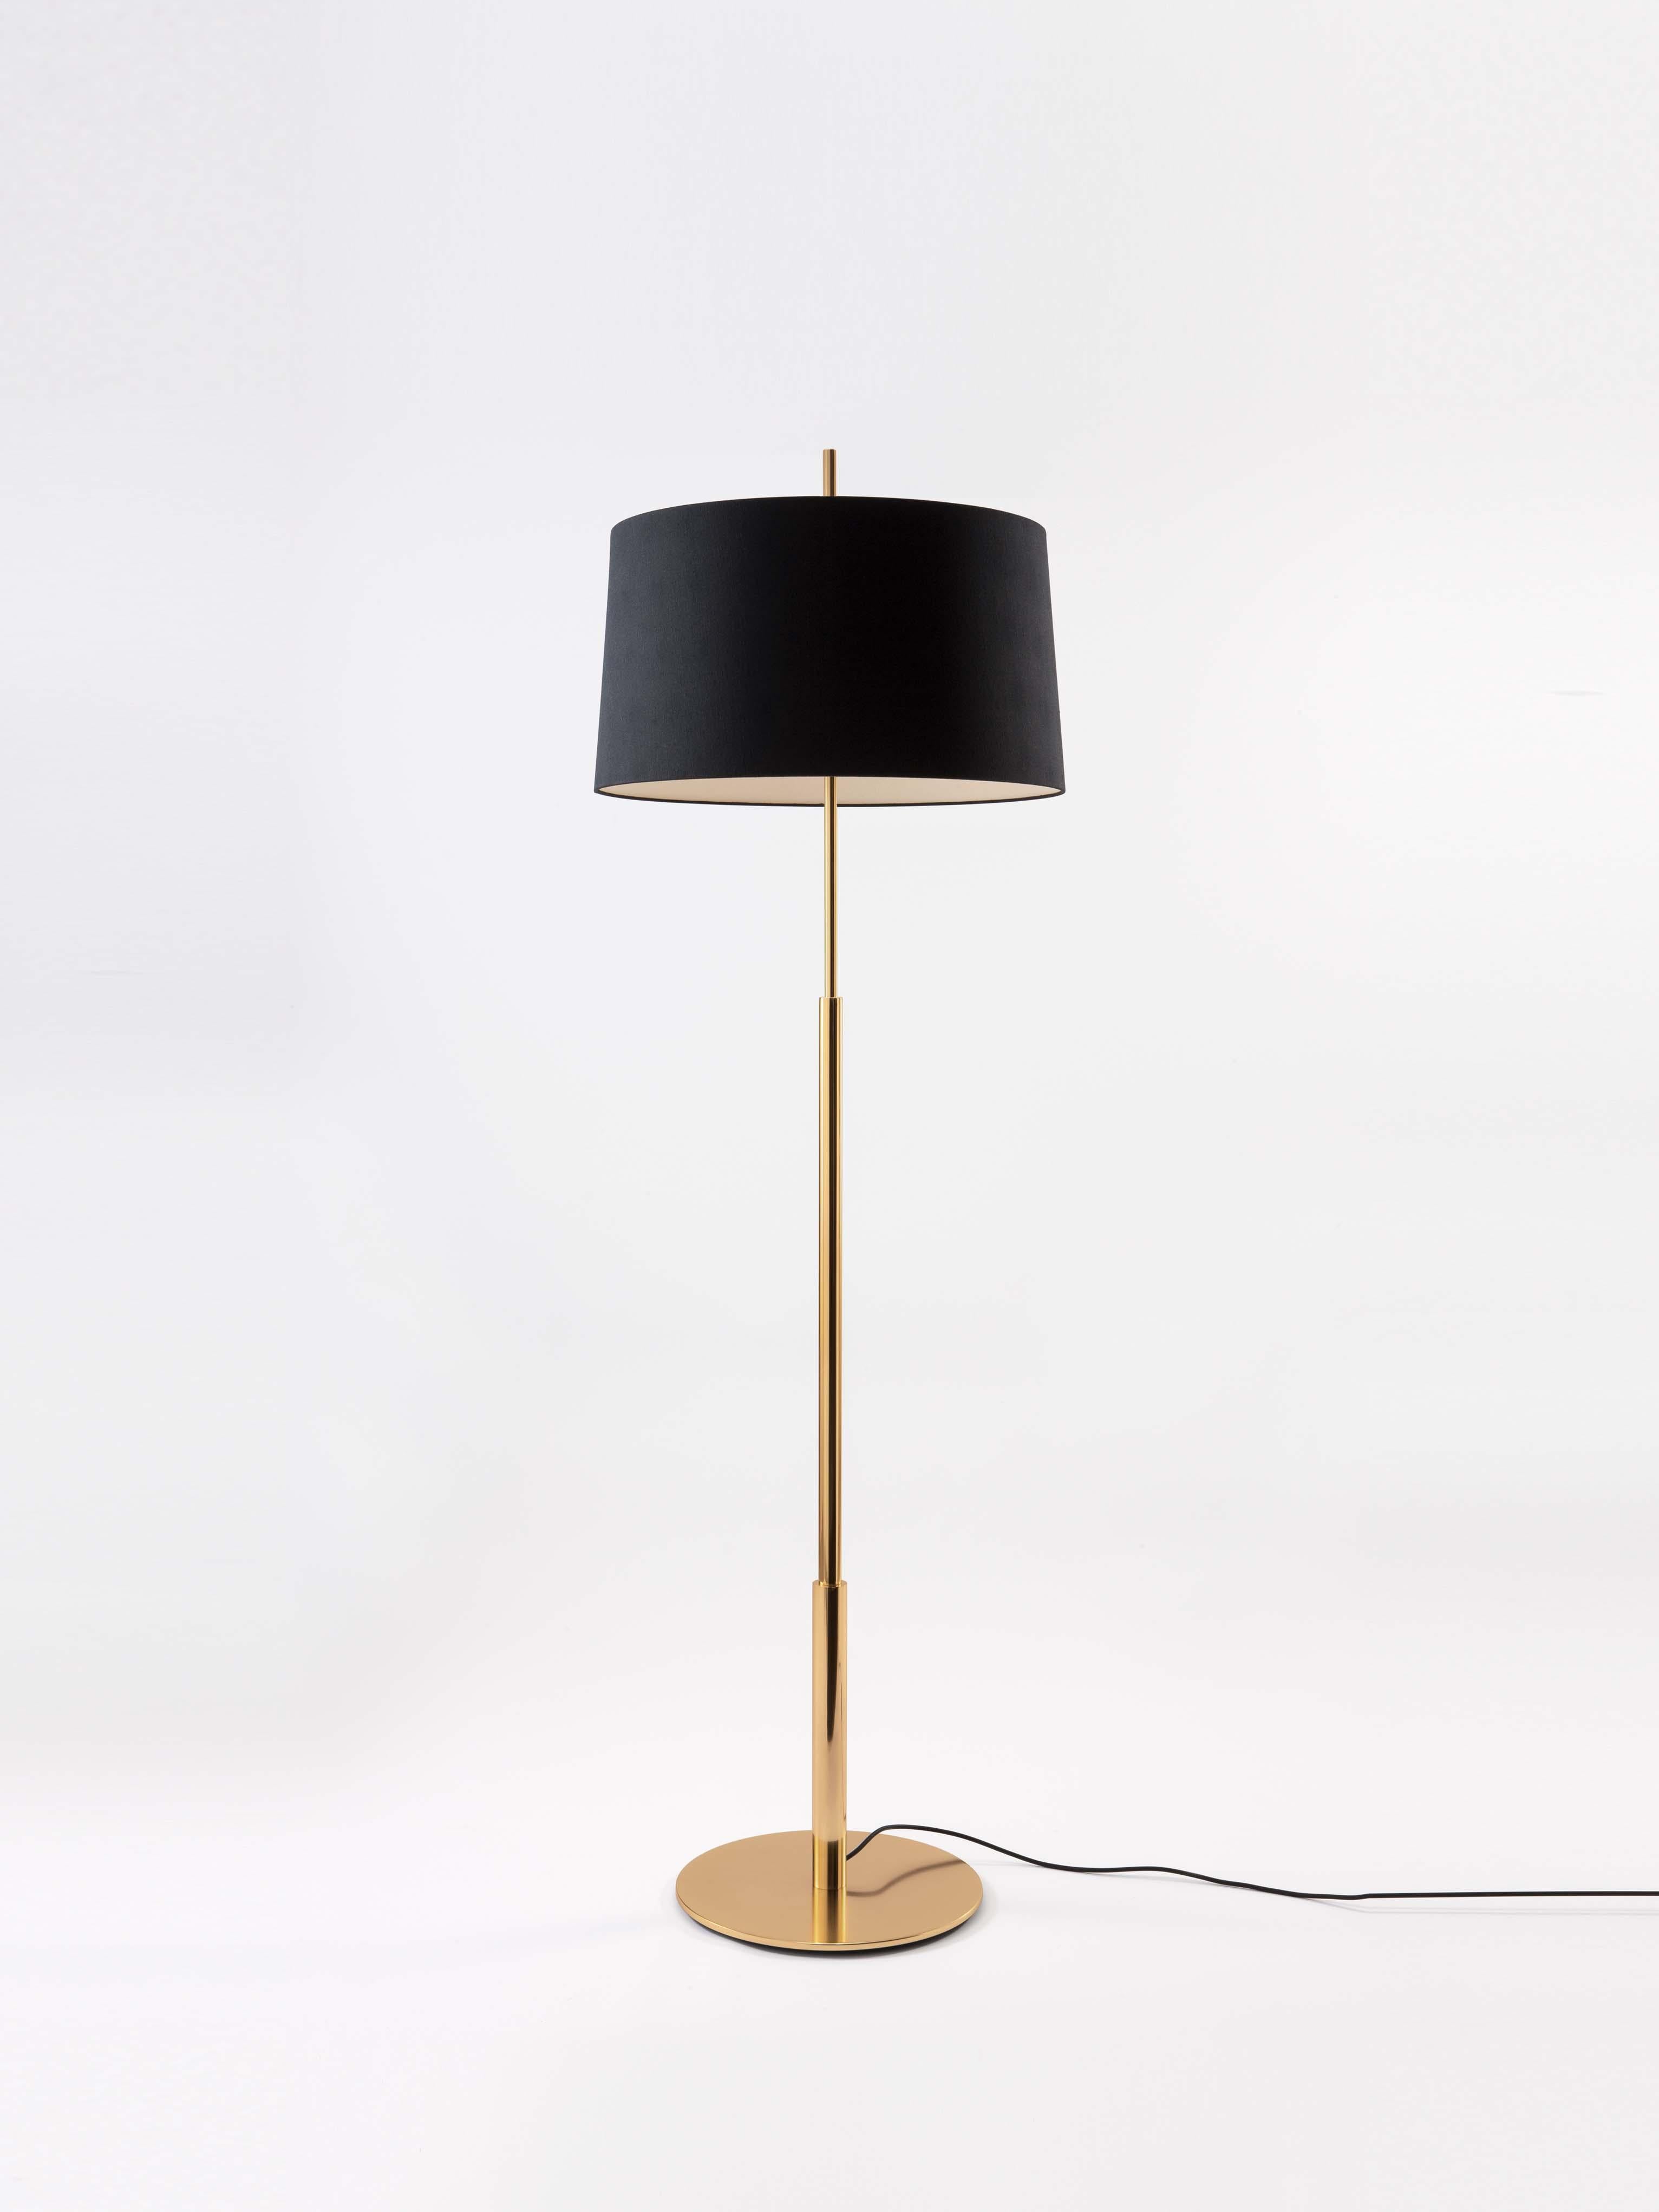 Gold Diana floor lamp by Federico Correa, Alfonso Milá, Miguel Milá
Dimensions: D 58 x H 183 cm
Materials: Metal, linen.
Available in nickel or gold and in black or white shade.

In keeping with the calling of its creators, the Diana lamp has a